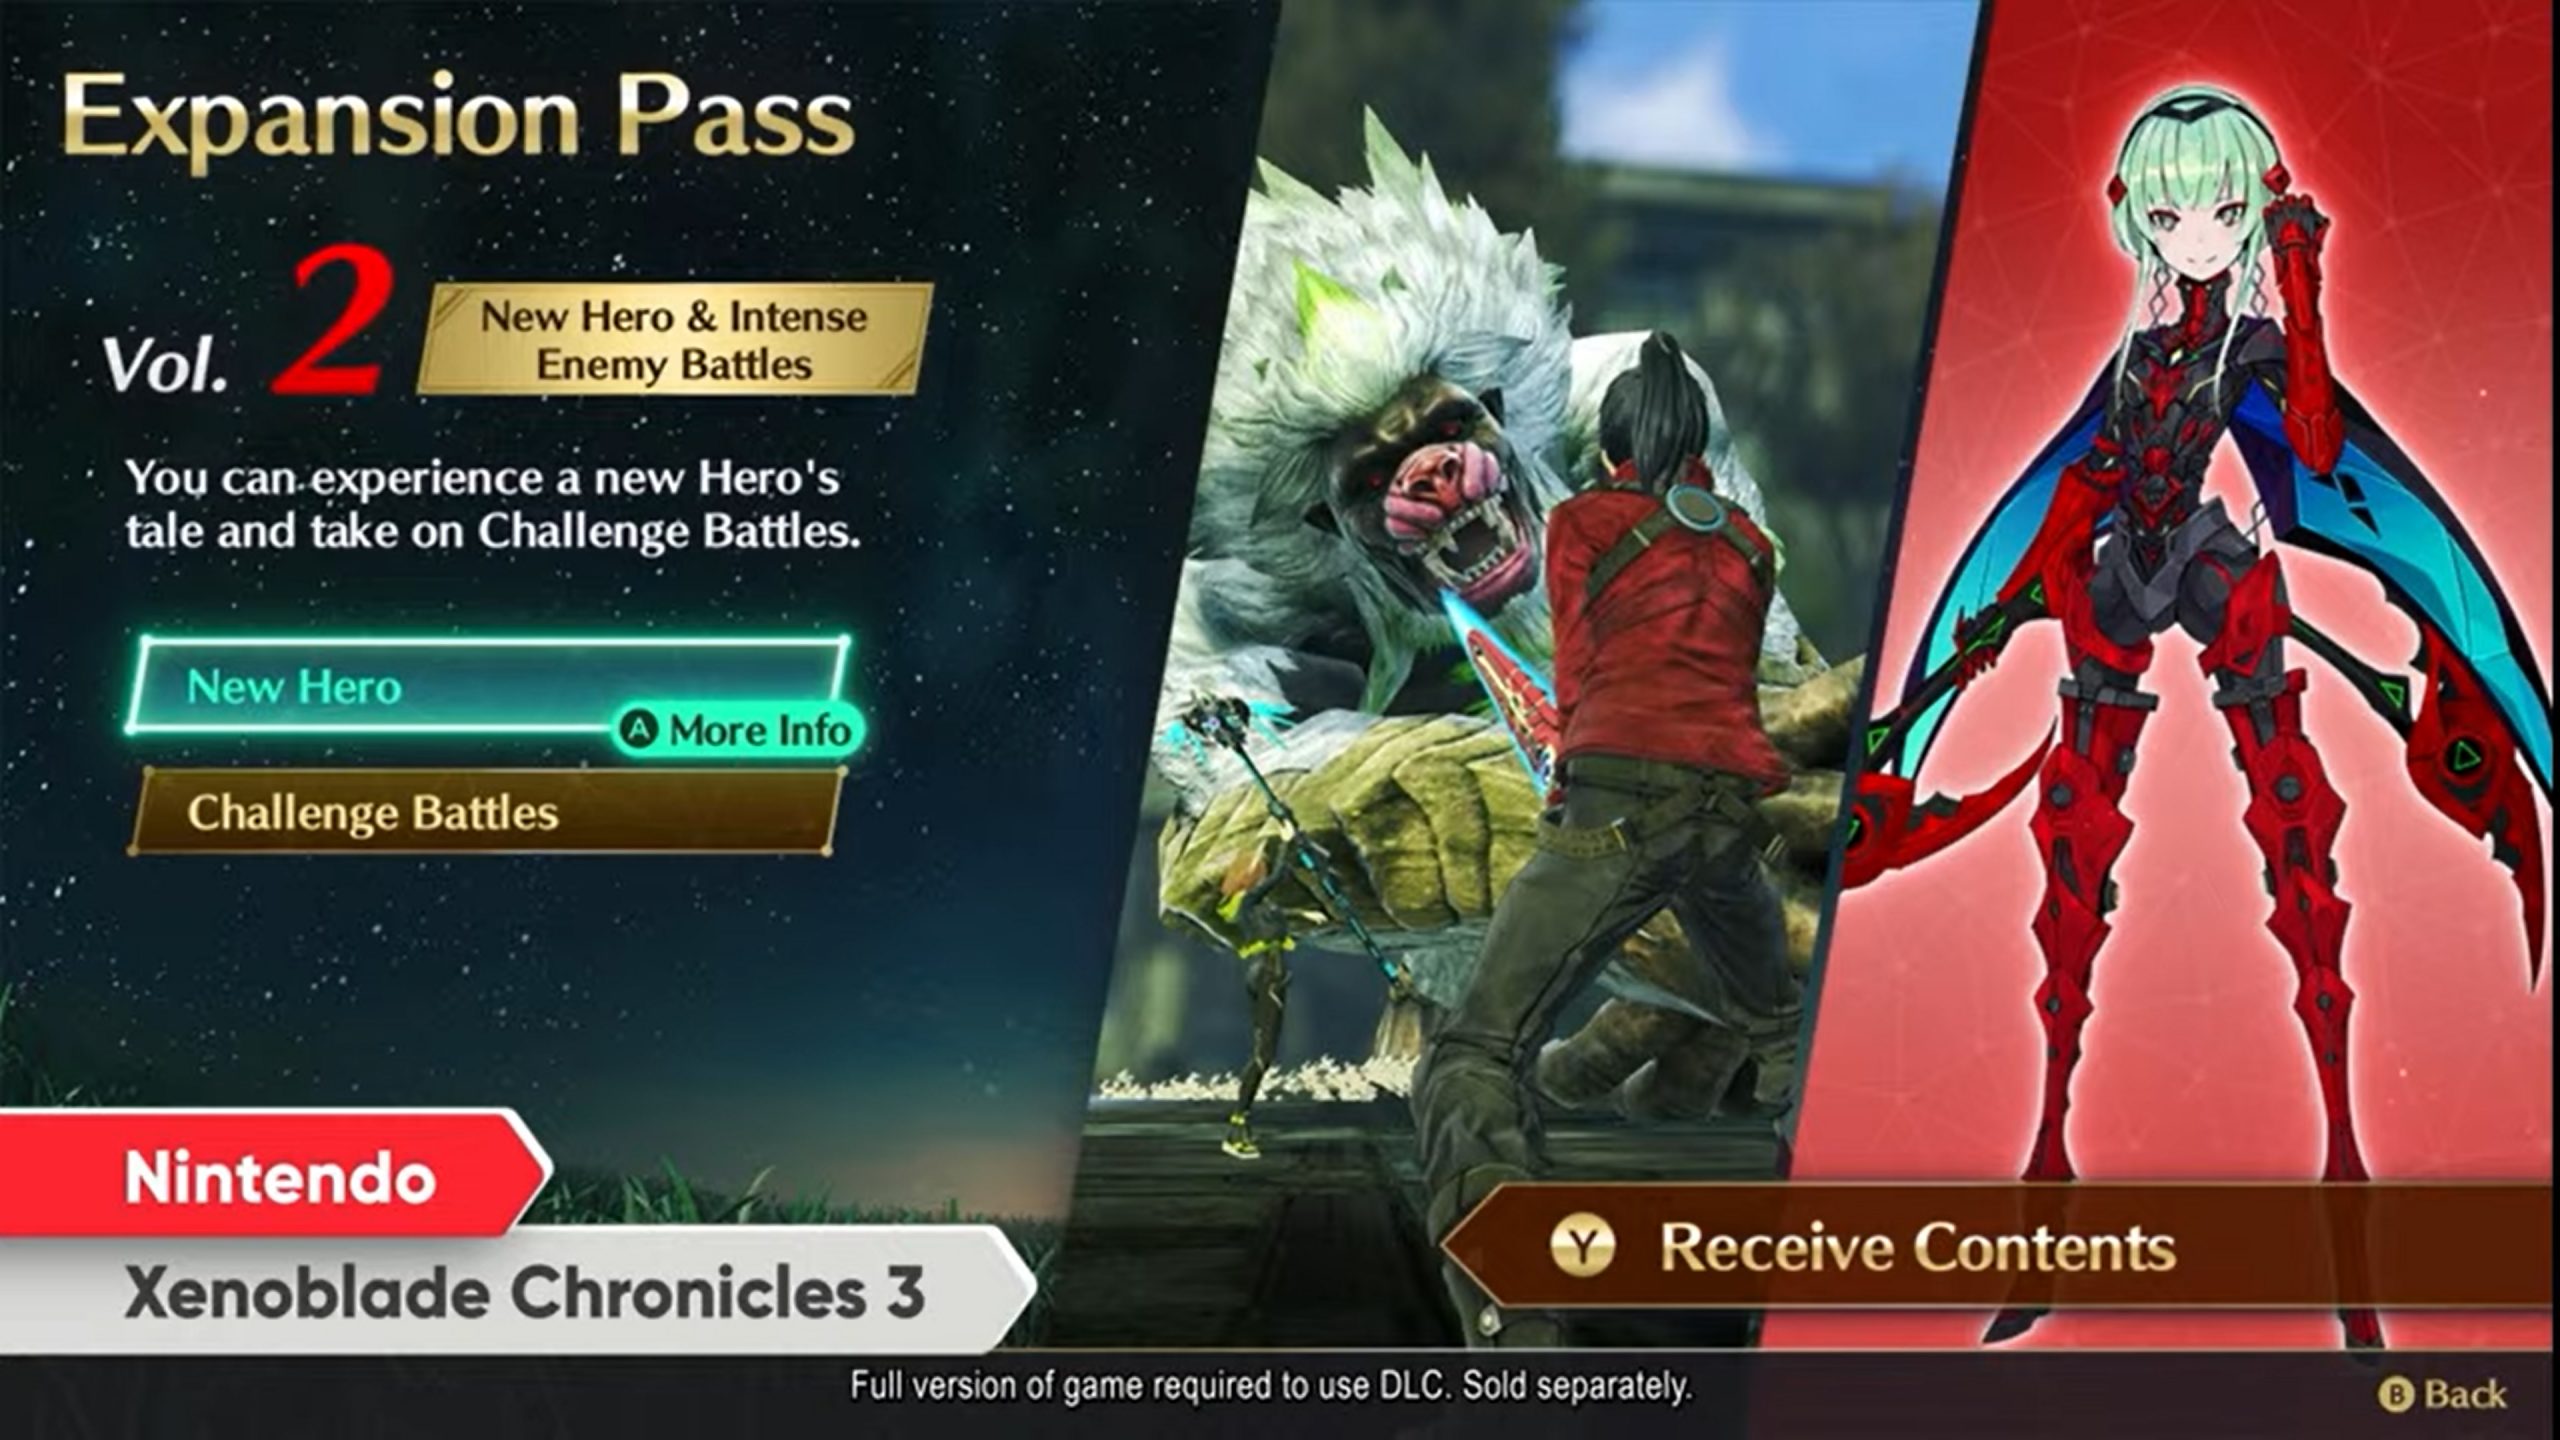 Xenoblade Chronicles 3 reveals Ino for Expansion Pass, out next month